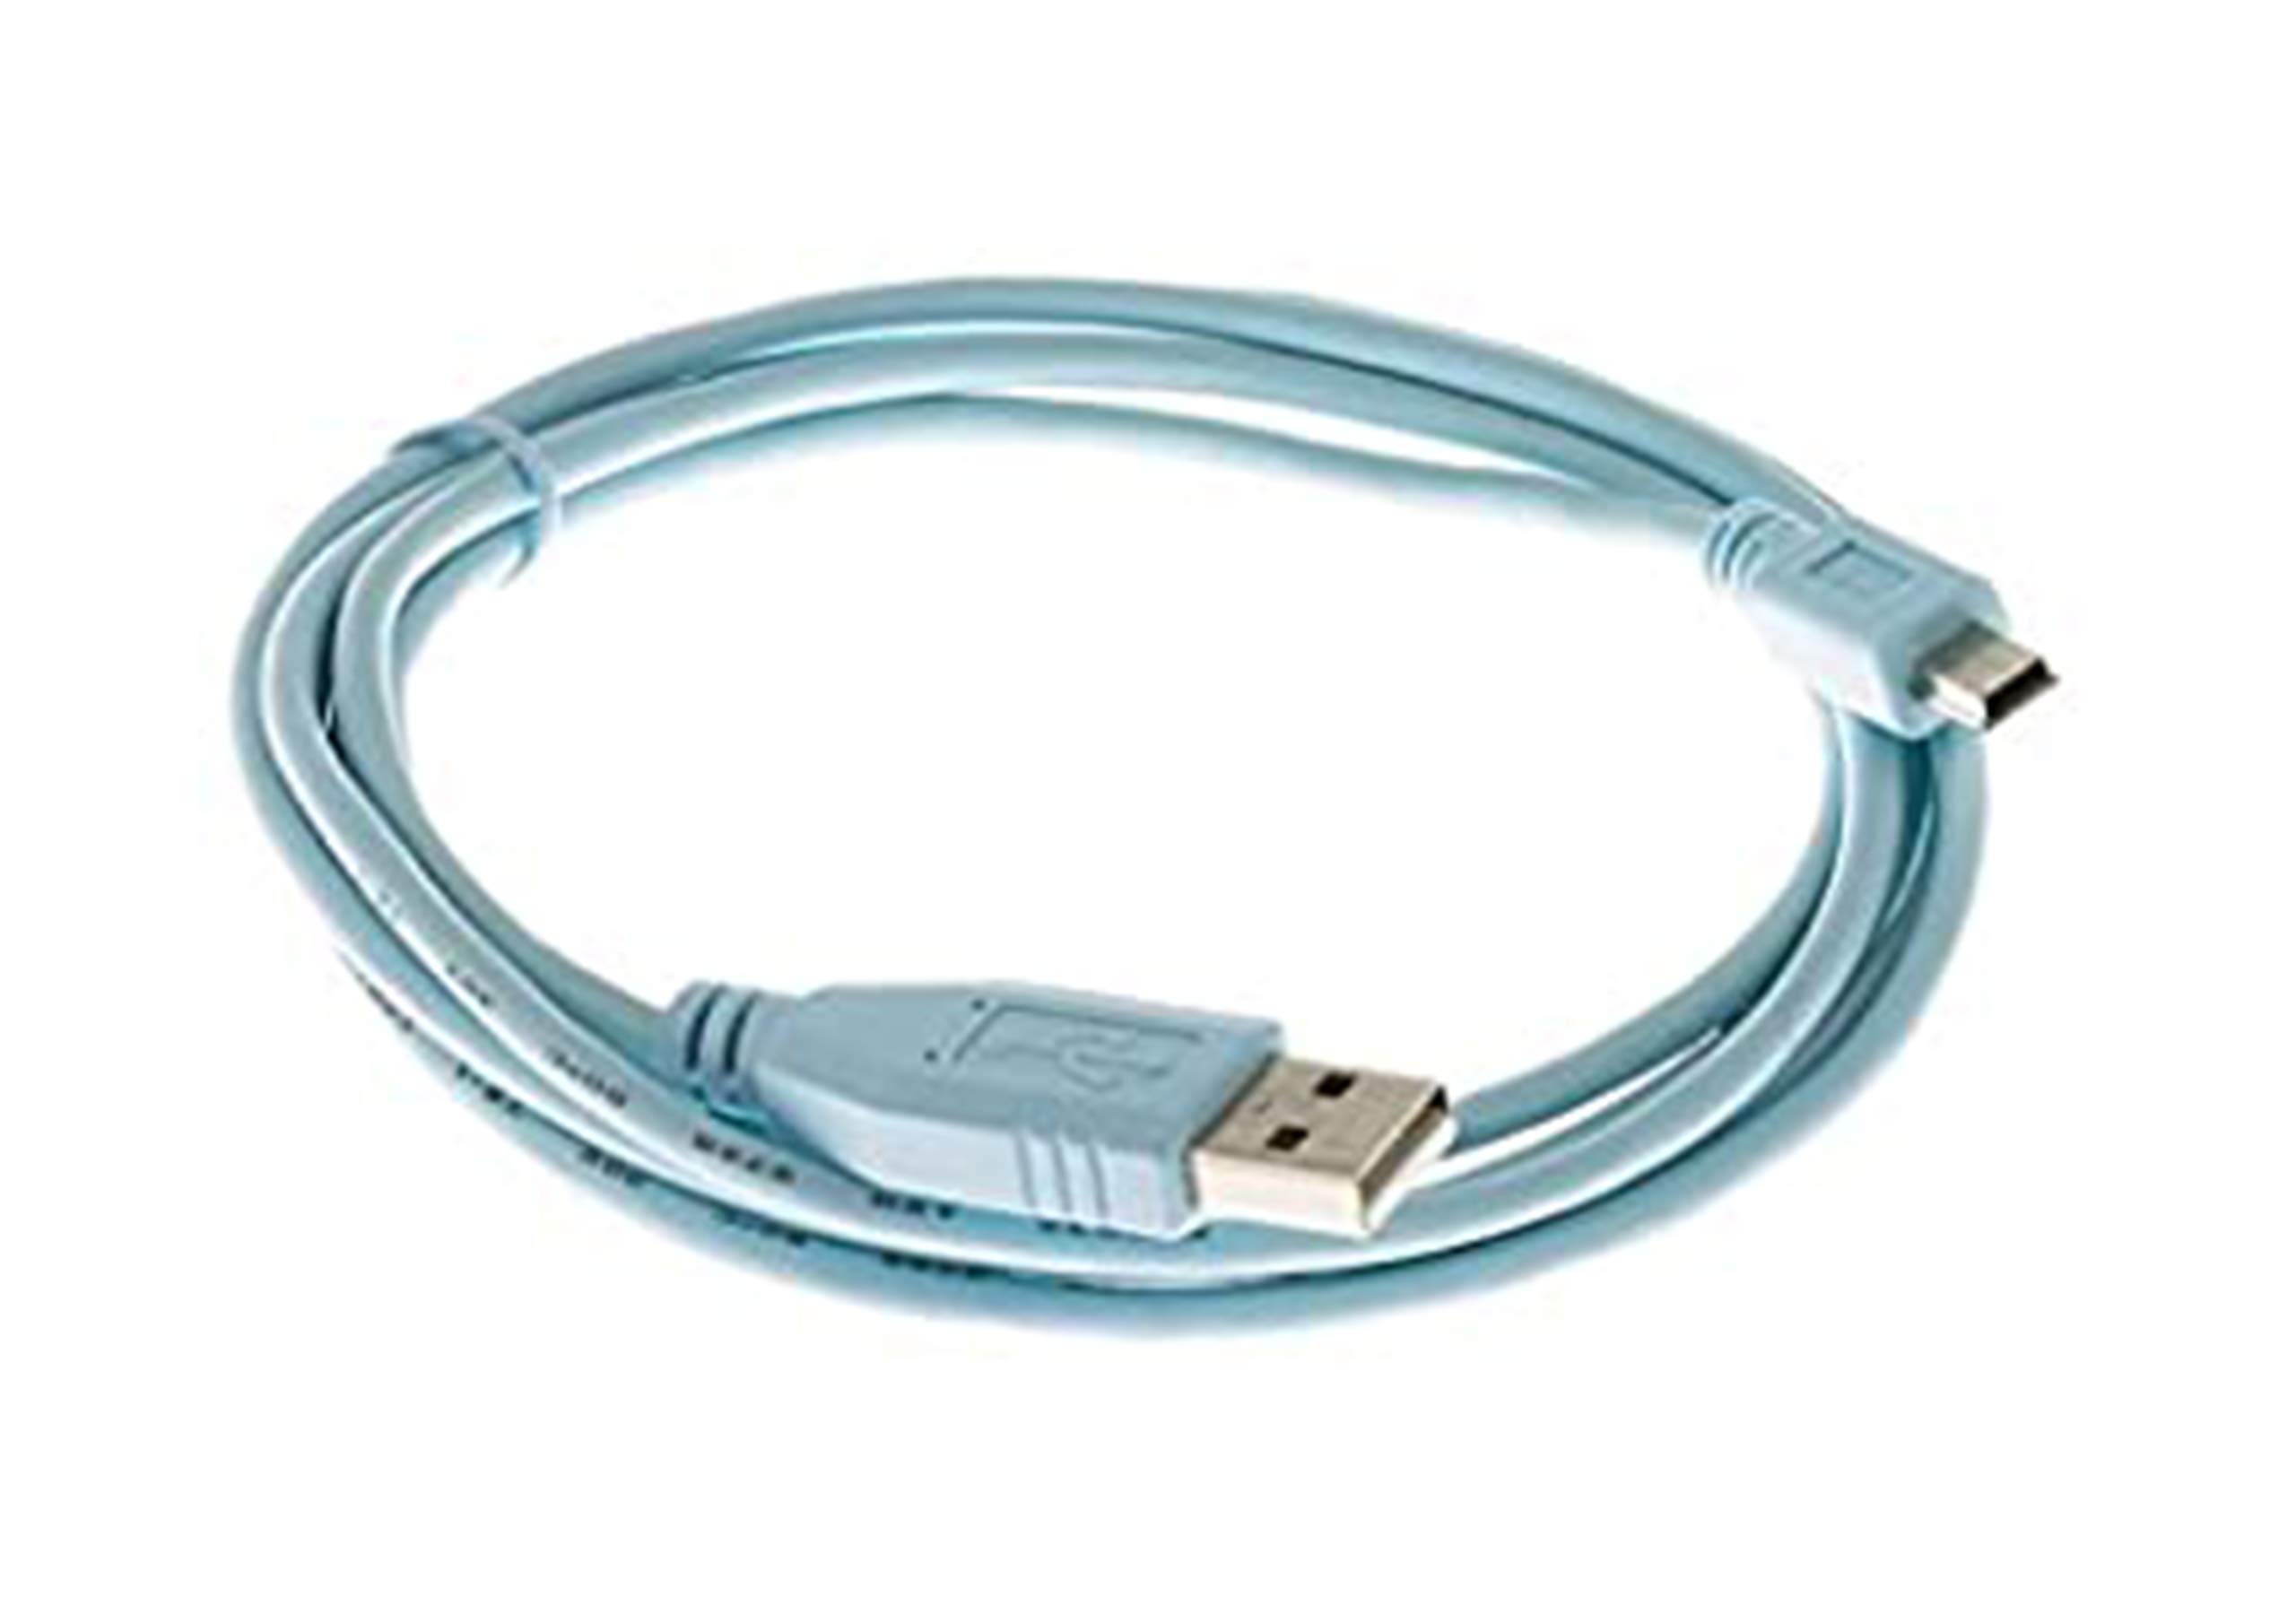 Console Cable 6 Ft With Usb Cisco Accessories Cab Console Usb 882658299650